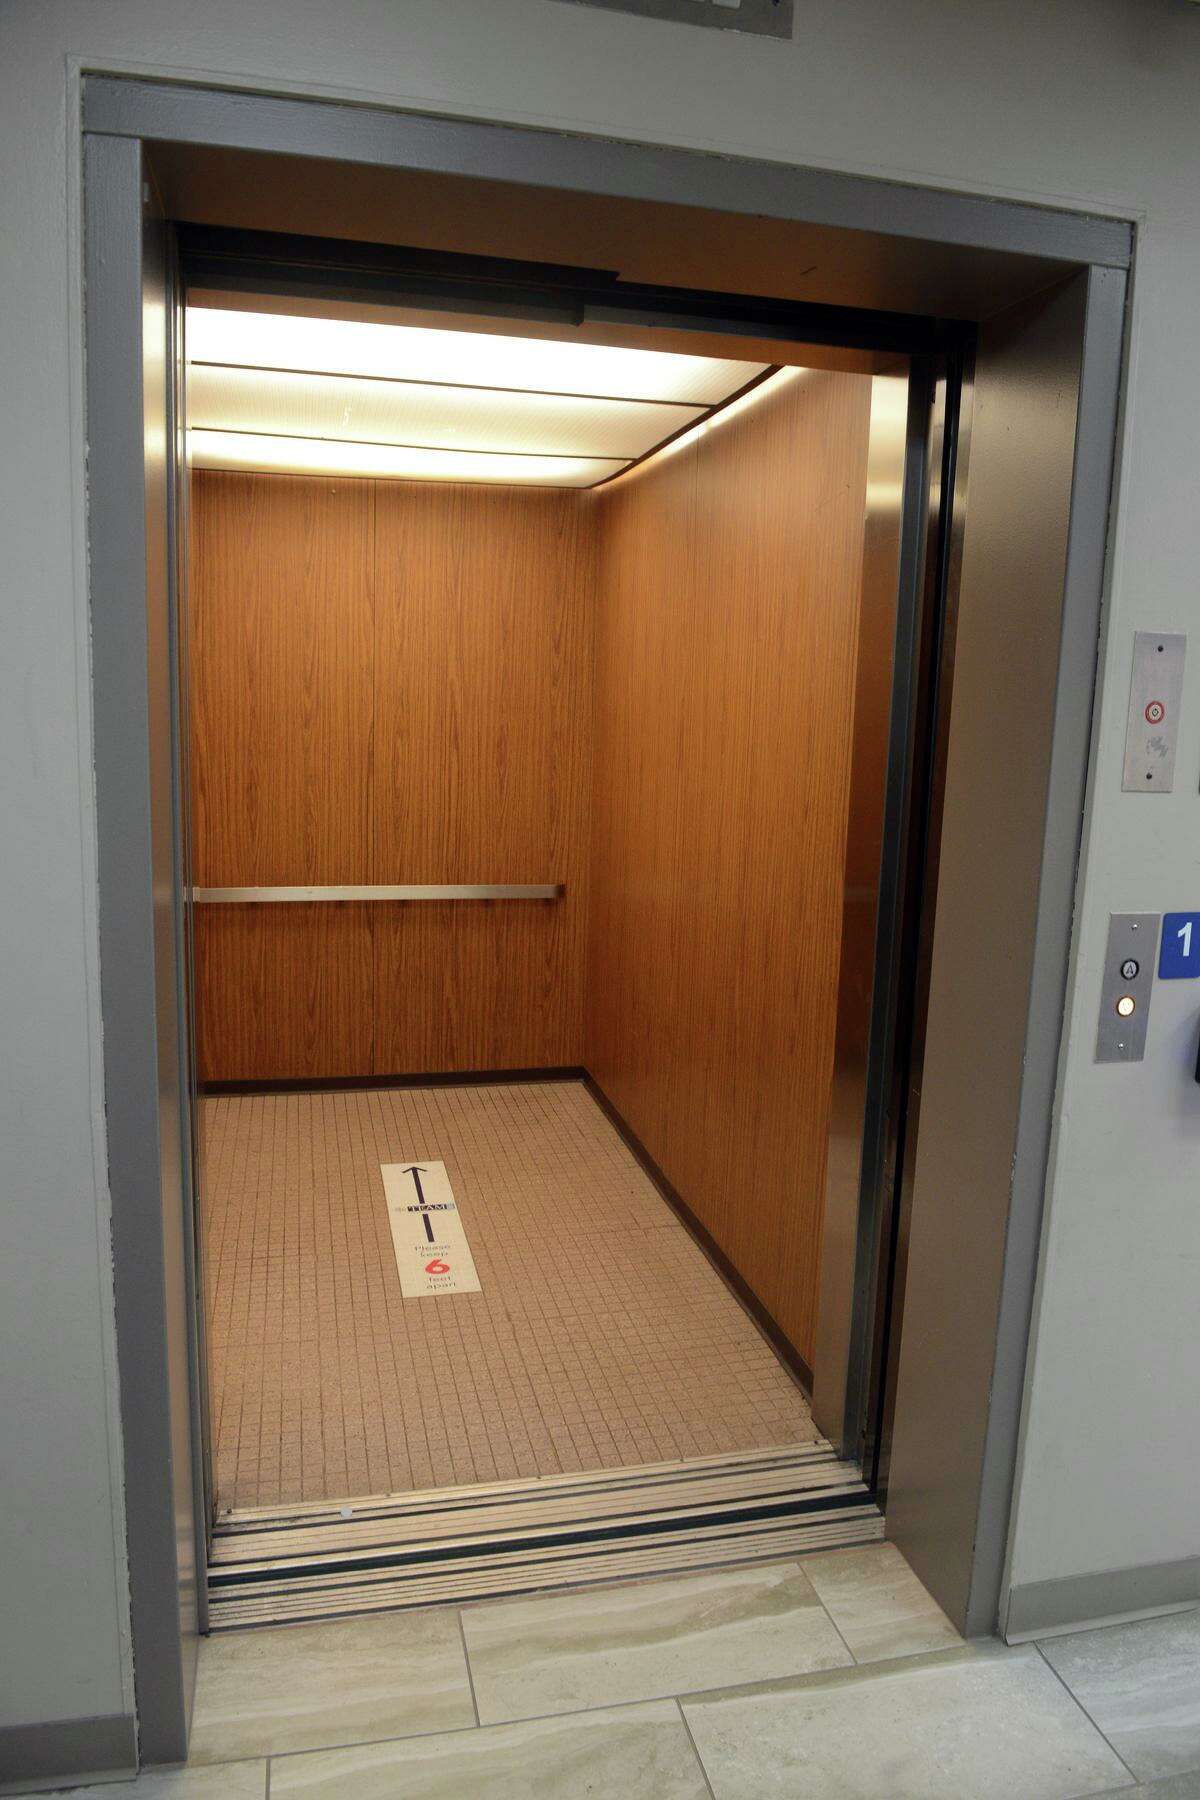 The aging elevator at TEAM, Inc., in Derby, Conn. Dec. 16, 2021.